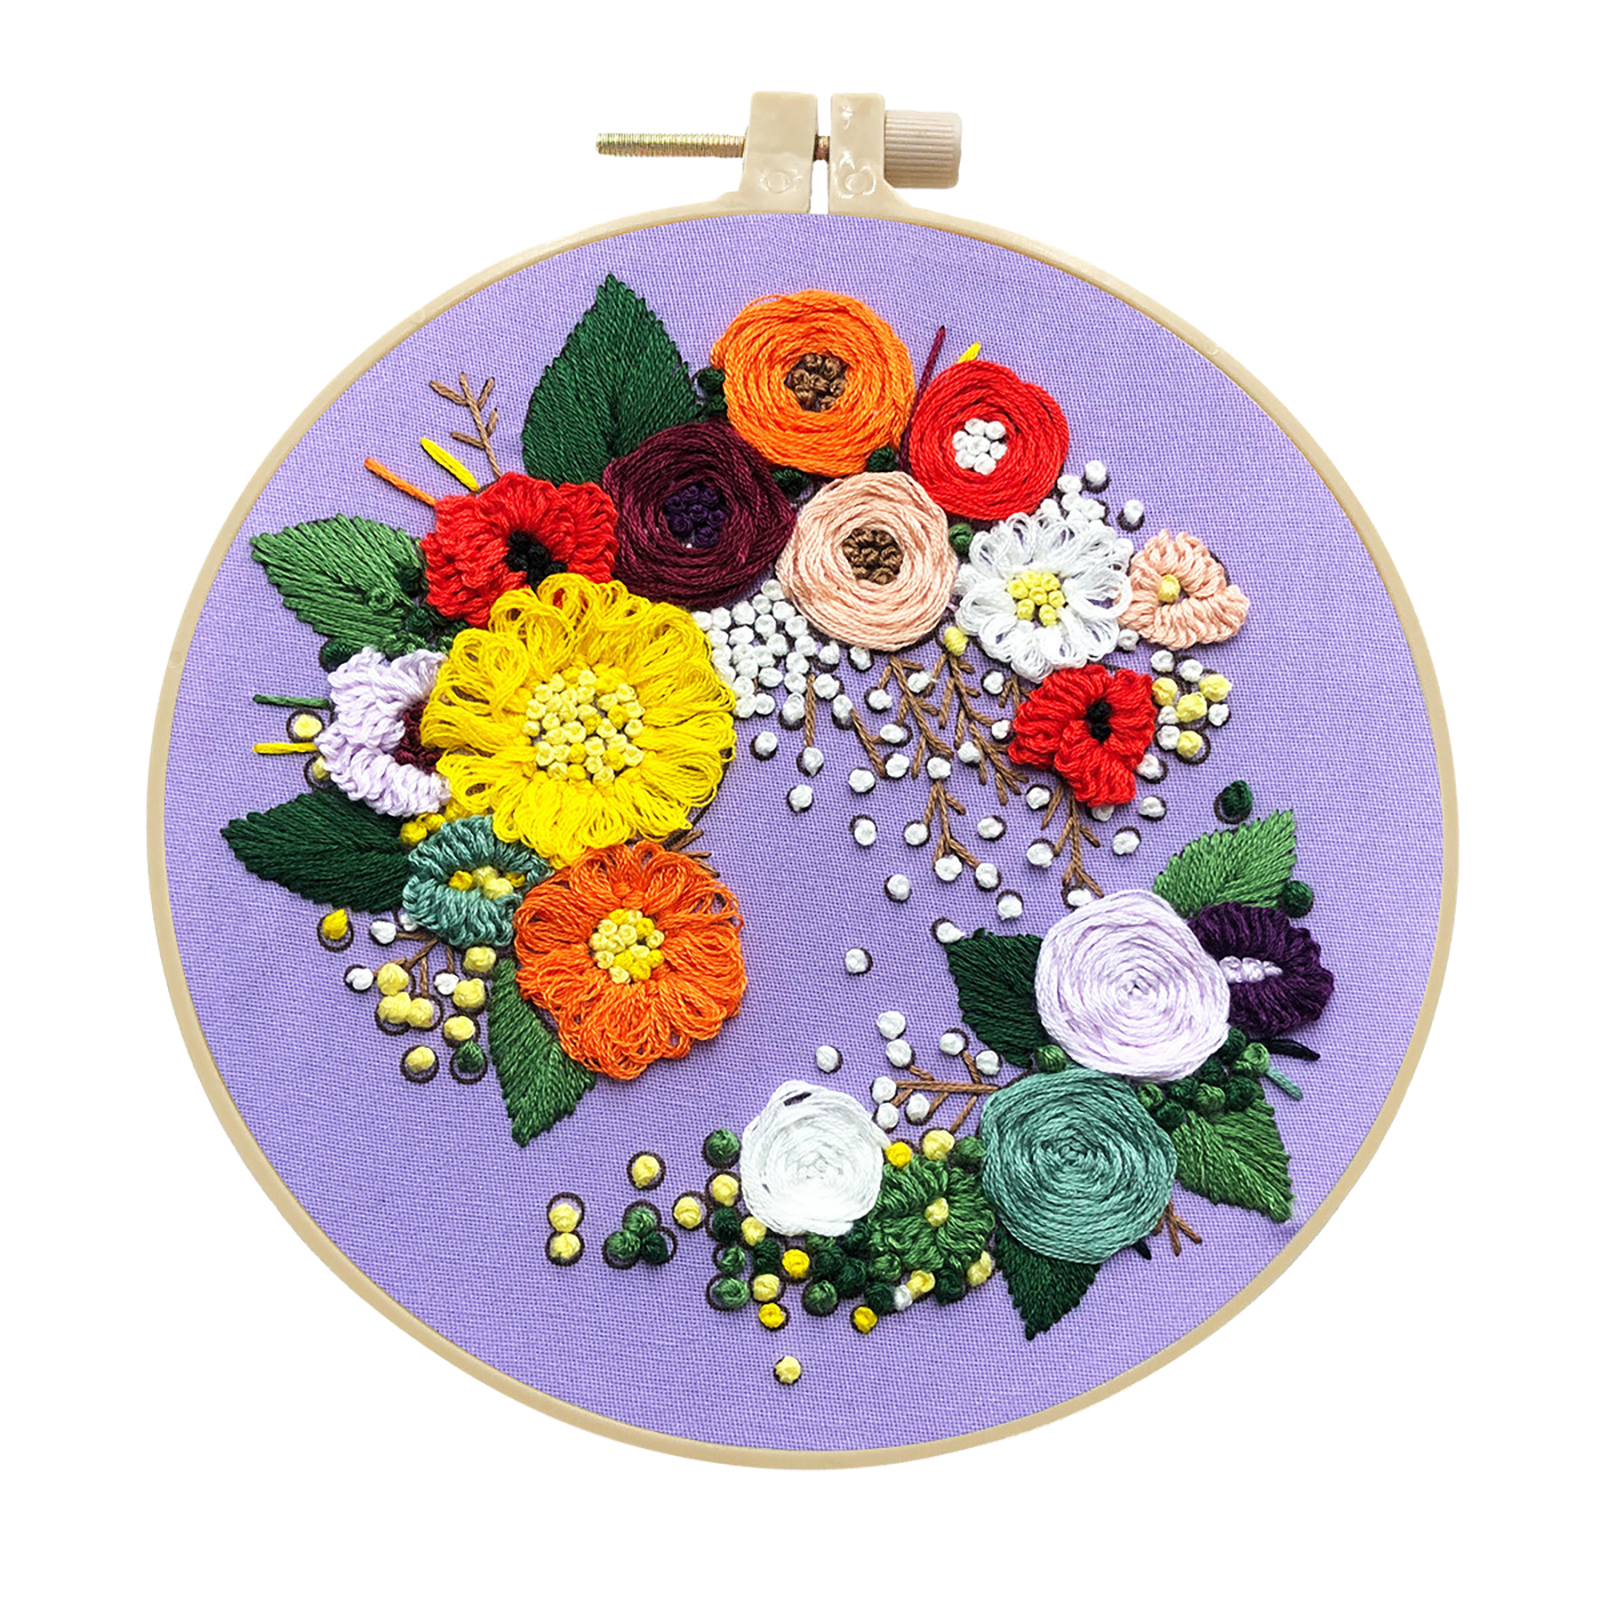 Embroidery Kits Cross stitch kits for Adult Beginner - Pretty flowers Pattern